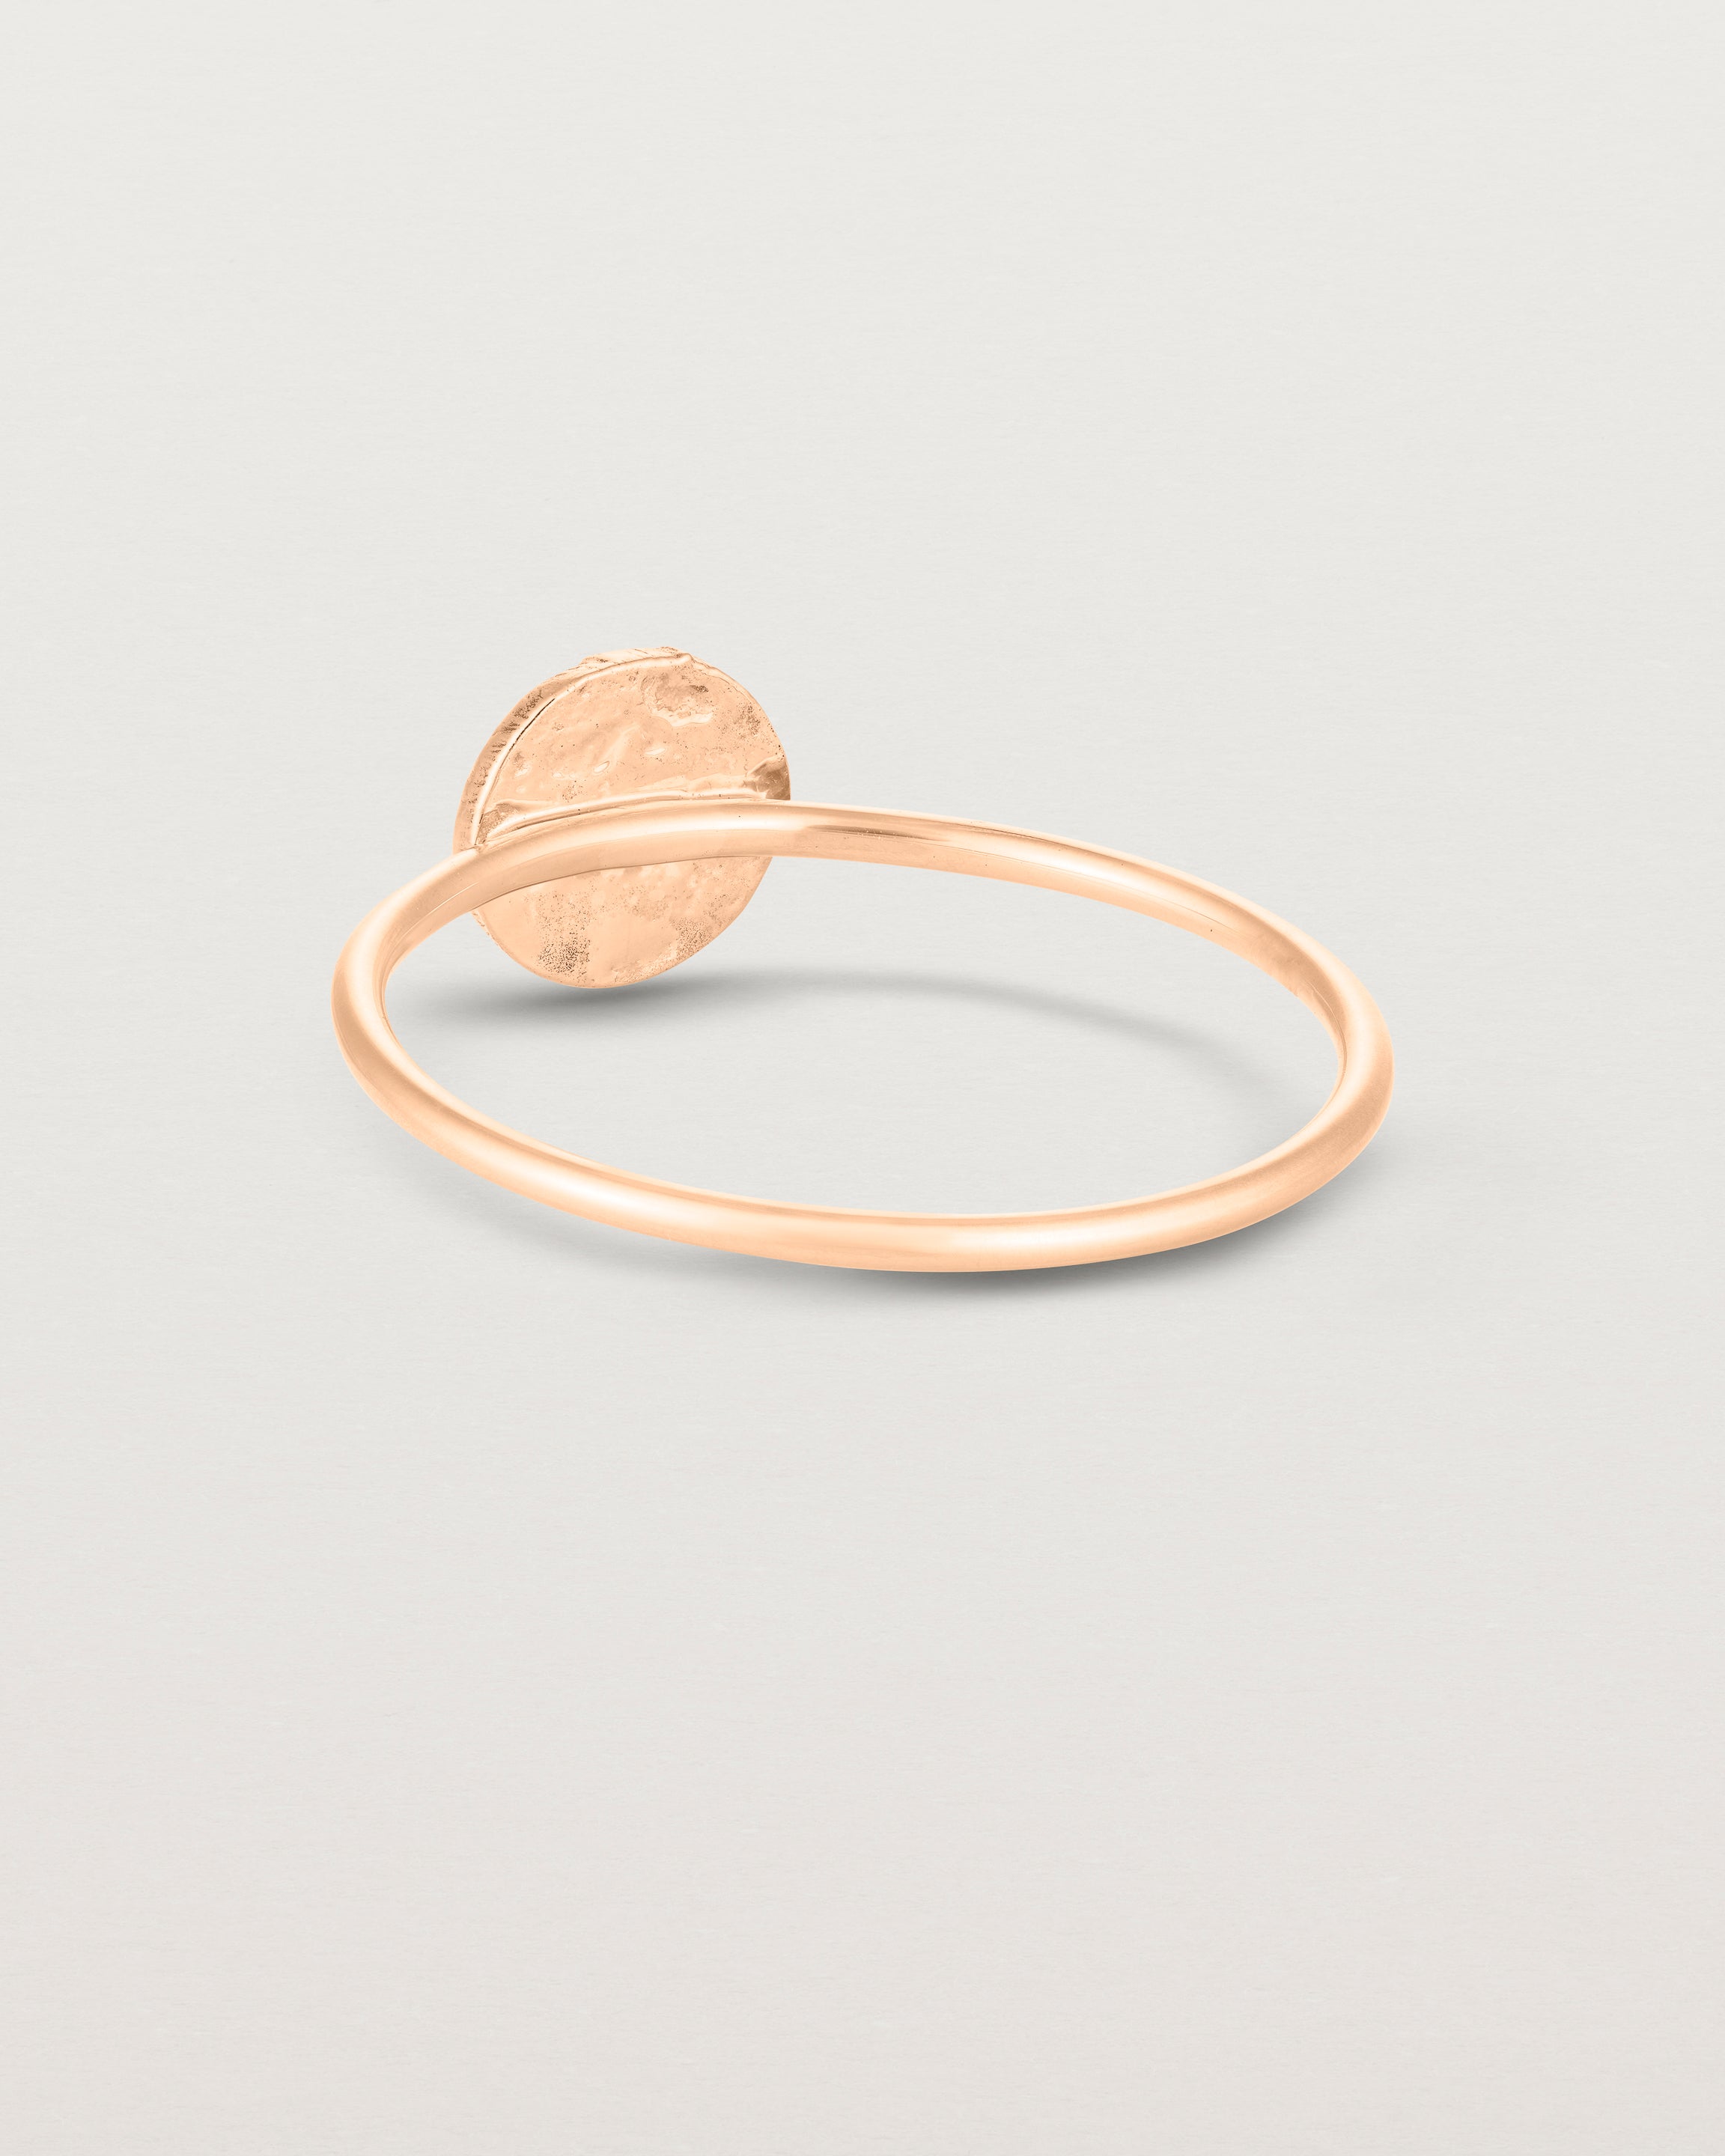 Back view of the Moon Ring in rose gold.